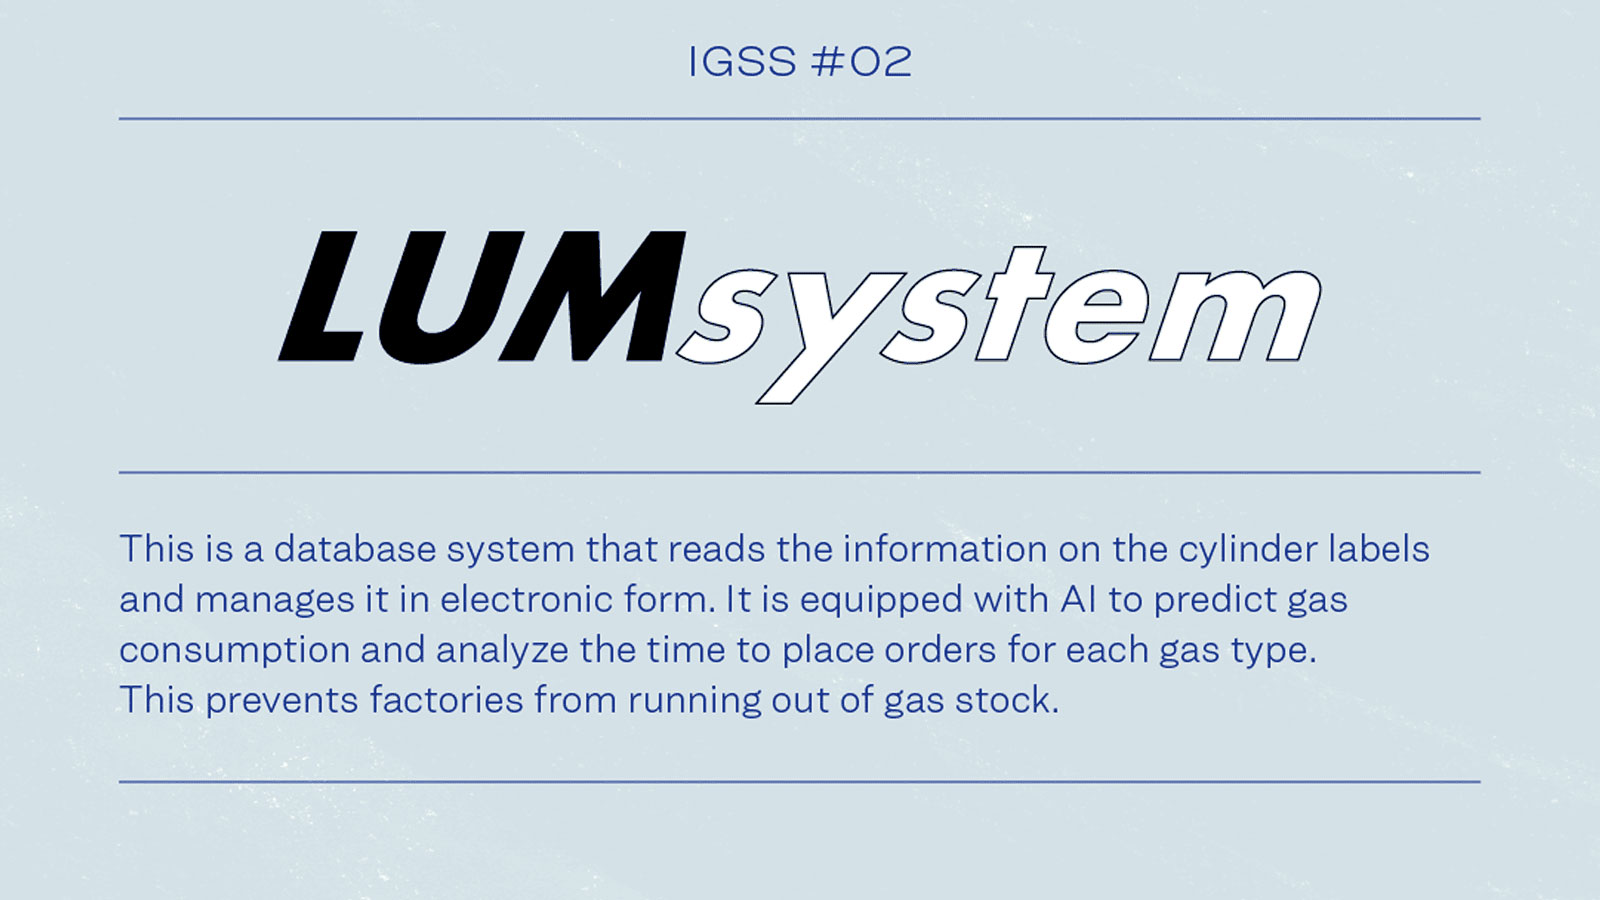 IGSS #02 LUMsystem This is a database system that reads the information on the cylinder labels and manages it electronic form. It is equipped with AI to predicts gas consumption and analyze the time to place orders for each gas type.This prevents factories from running out of gas stock.